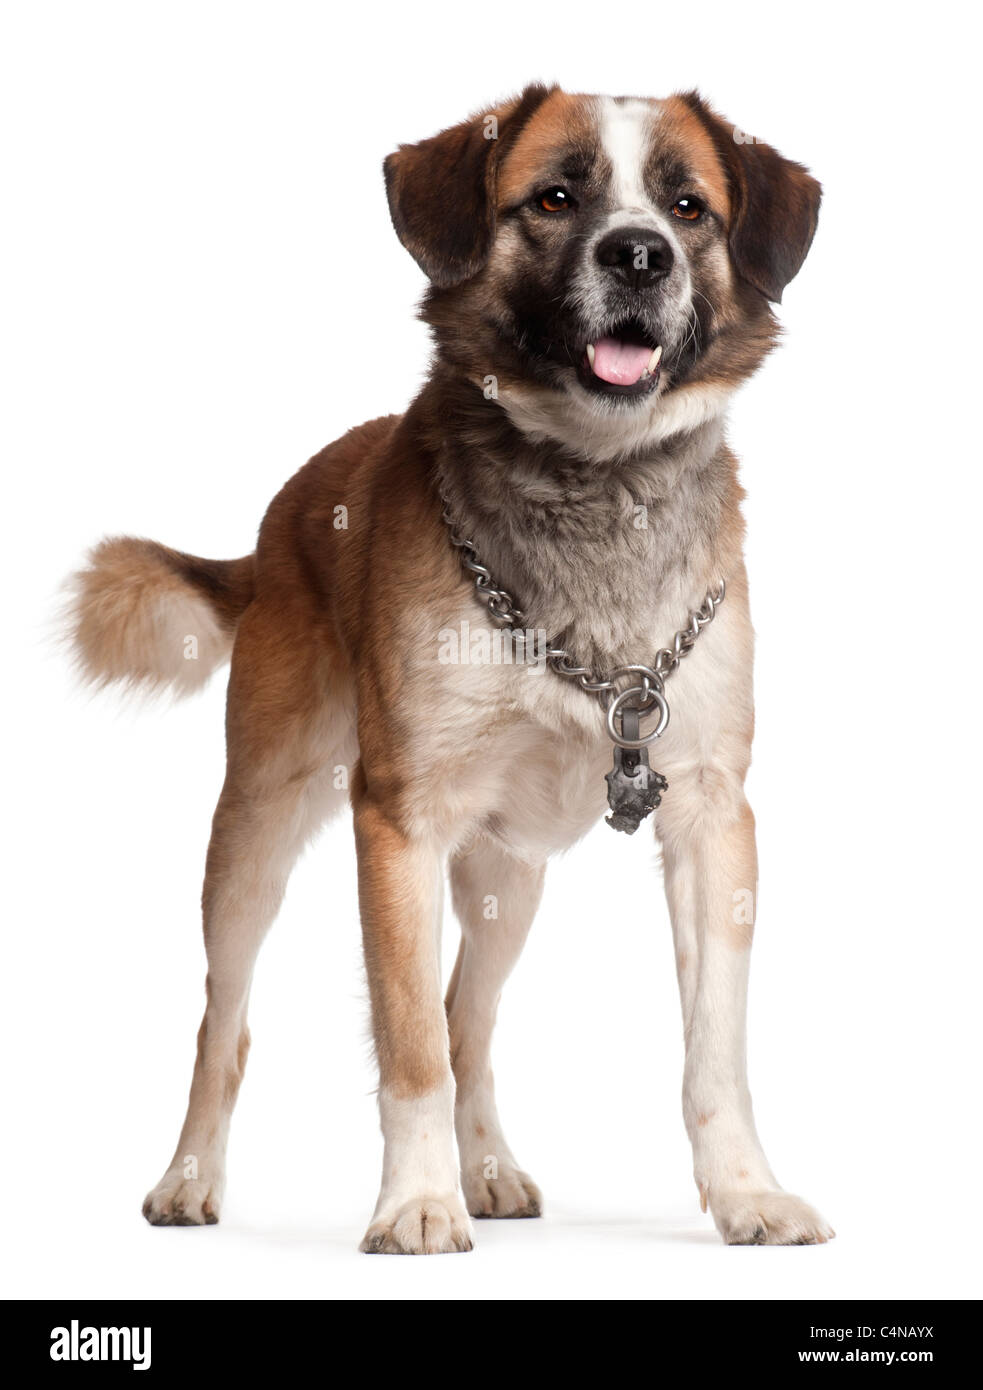 Mixed-breed dog, 5 years old, standing in front of white background Stock Photo